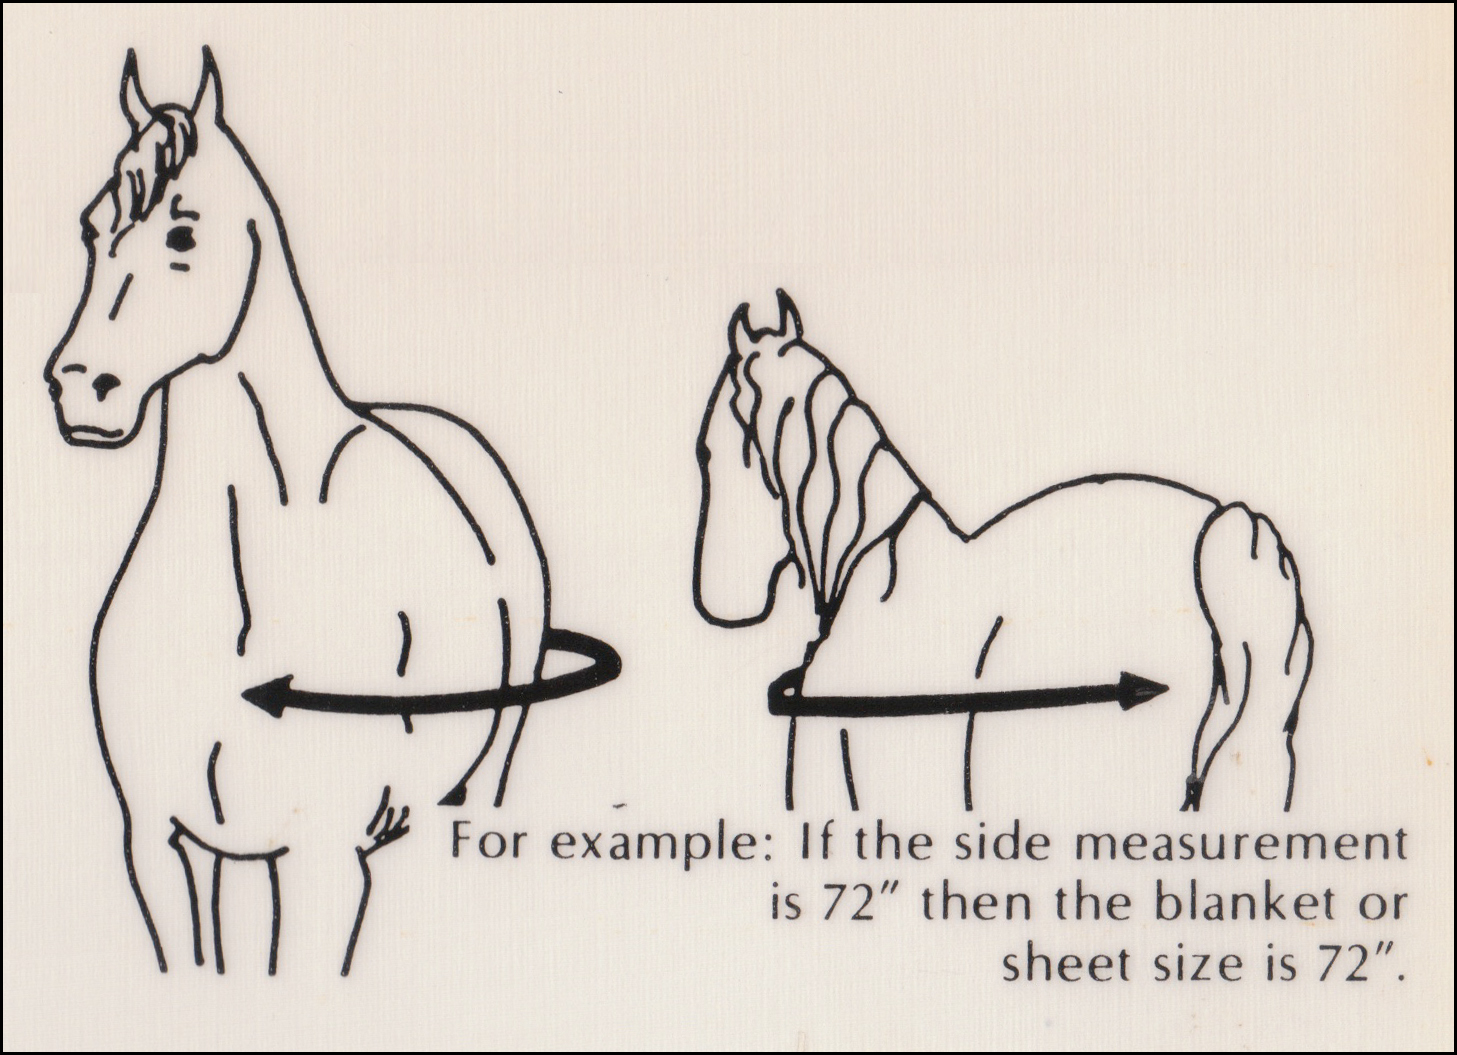 Here is how toHere is how tomeasureyourHere is how toHere is how tomeasureyourhorseto find aHere is how toHere is how tomeasureyourHere is how toHere is how tomeasureyourhorseto find ahorse blanketthat will fit properly. Keep your hores safe and more comfortable with properHere is how toHere is how tomeasureyourHere is how toHere is how tomeasureyourhorseto find aHere is how toHere is how tomeasureyourHere is how toHere is how tomeasureyourhorseto find ahorse blanketthat will fit properly. Keep your hores safe and more comfortable with properblanketfit.